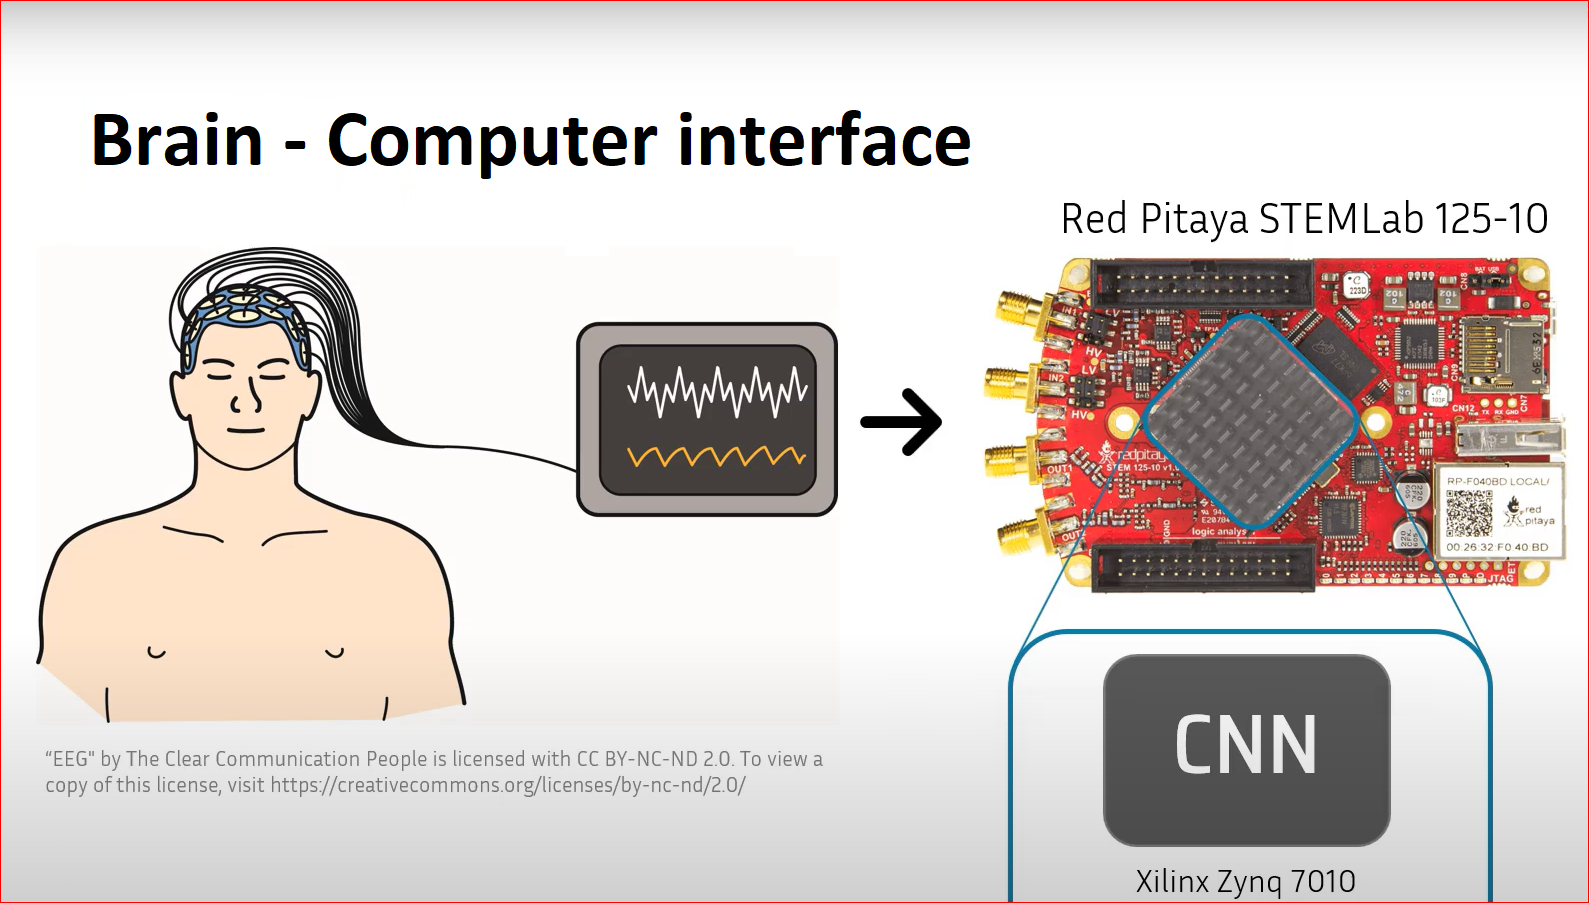 Brain–Computer Interface with the Red Pitaya STEMLab 125-10